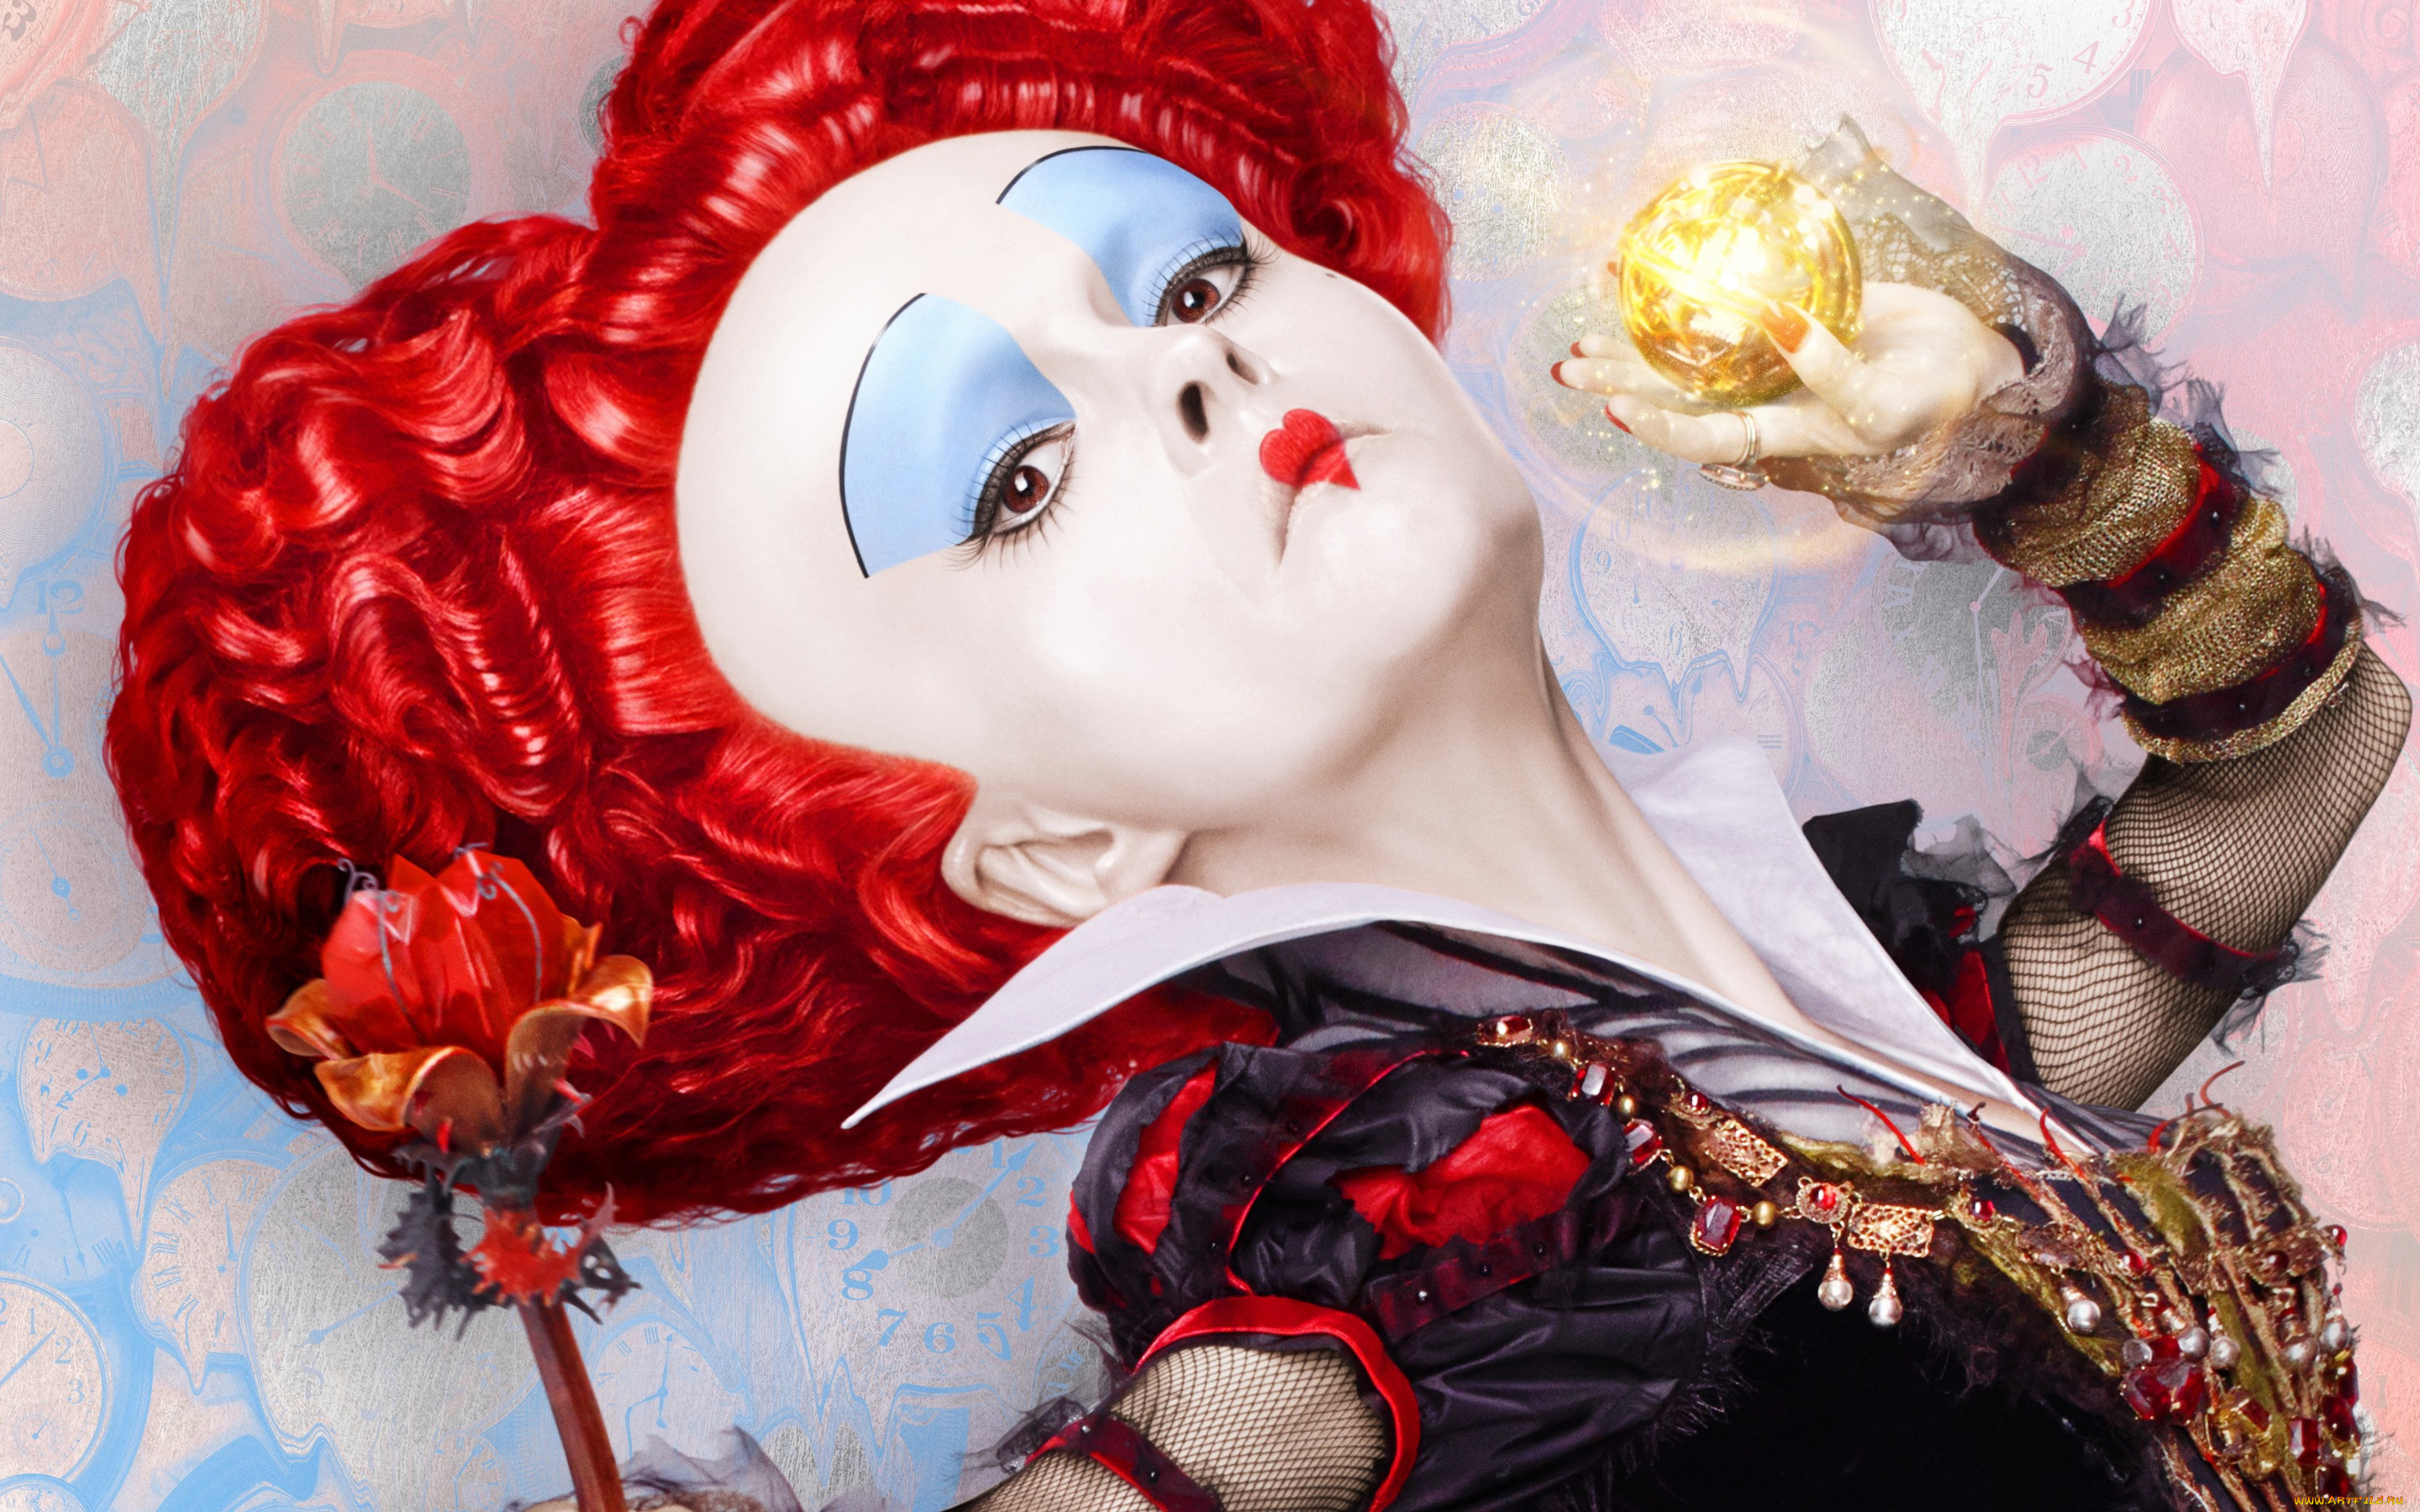  , alice through the looking glass, red, queen, alice, through, the, looking, glass, , , , , , , 2016, helena, bonham, carter